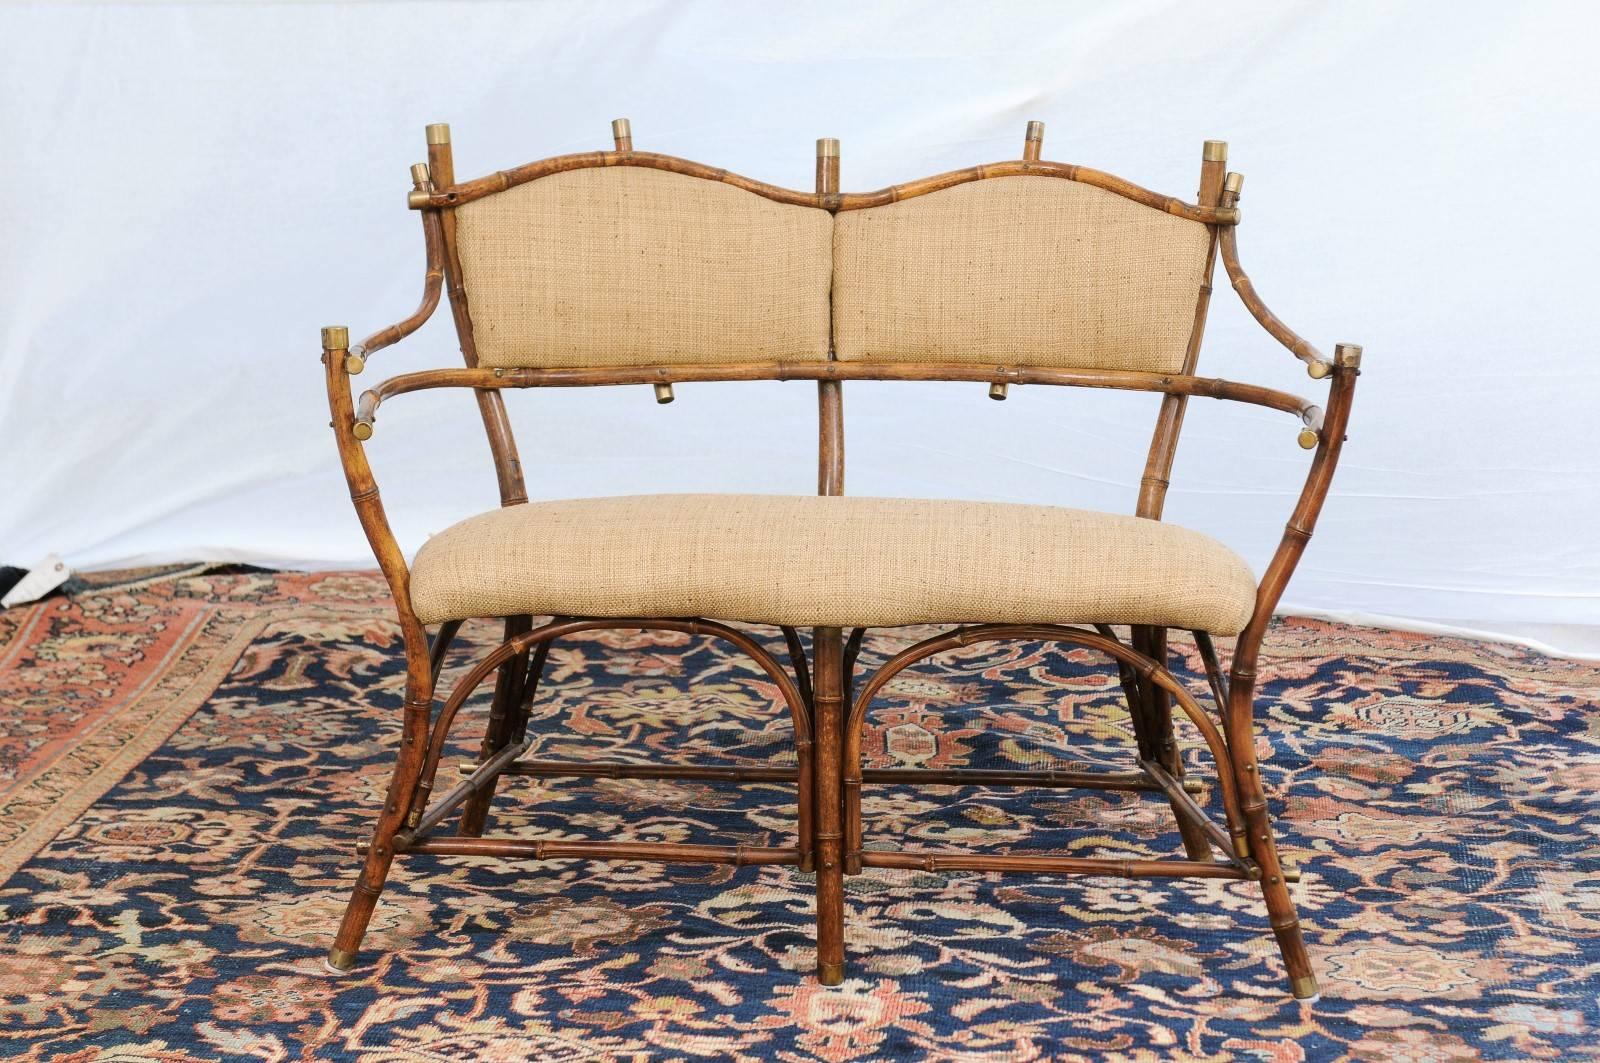 This English Edwardian period bamboo settee from the turn of the century features a two-seat open back with nicely curving armrests. The upholstered seat is raised on six legs with side stretchers. The Silhouette is accentuated with brass accents at